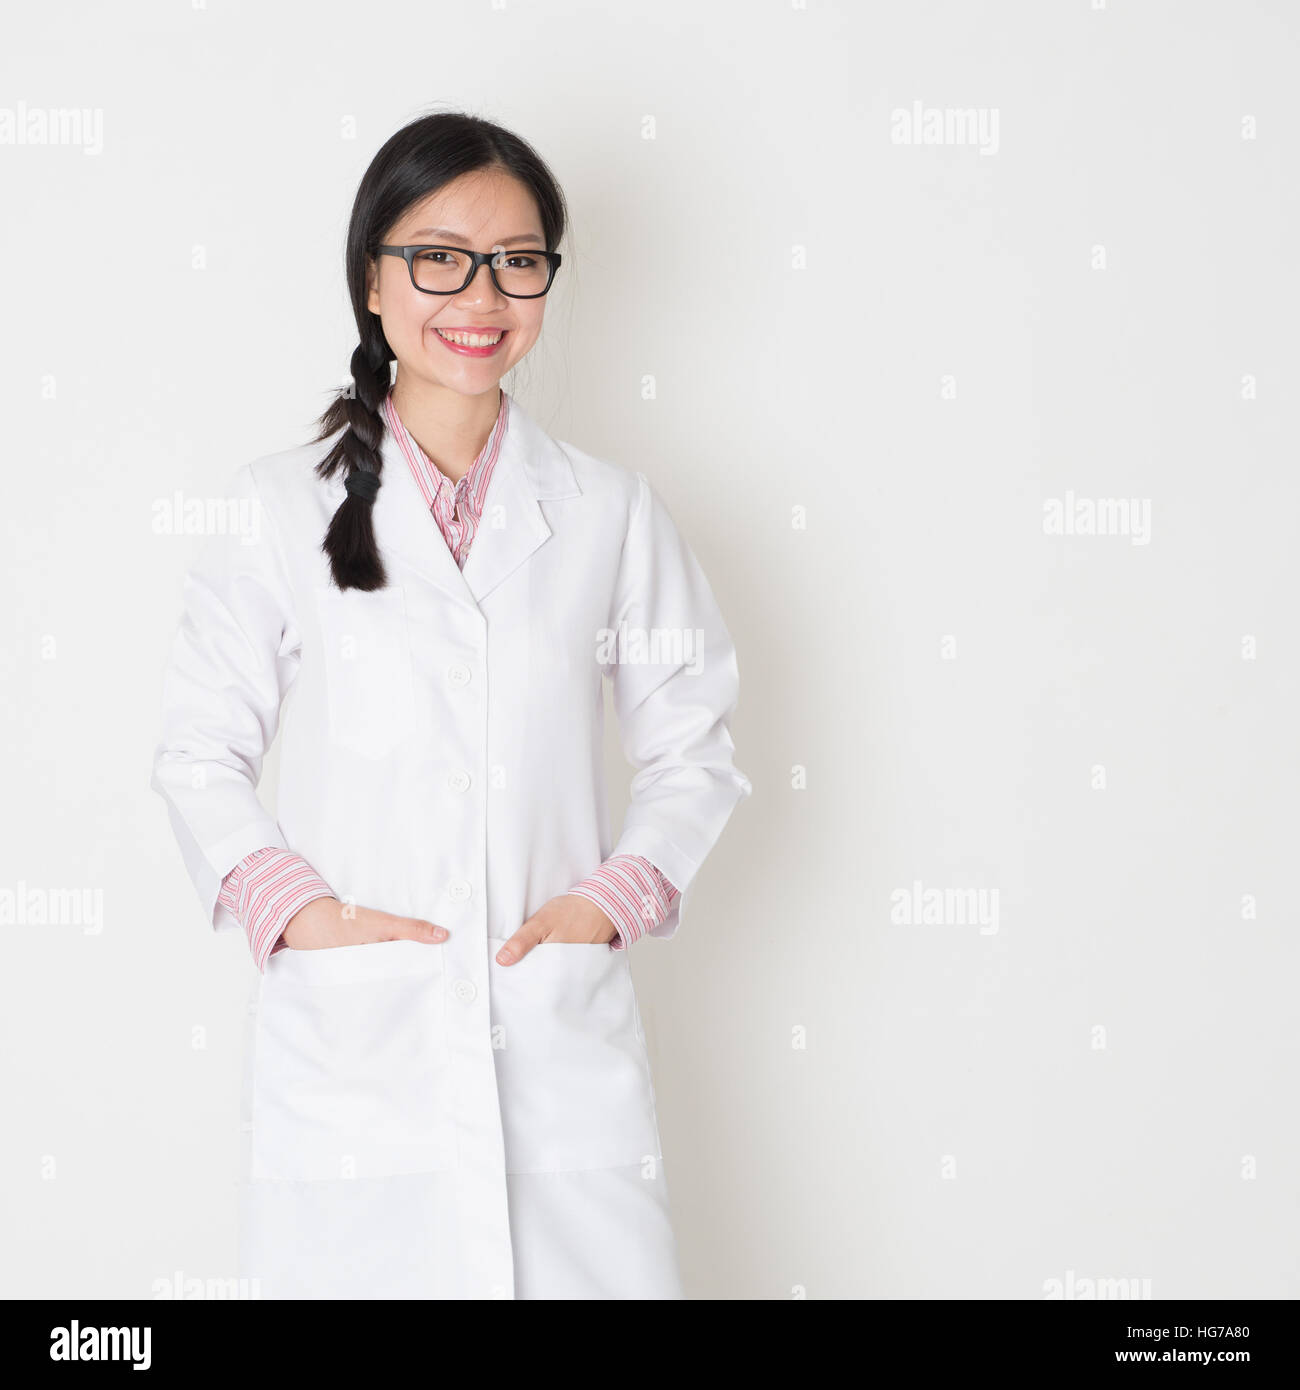 Portrait of young Asian female scientist with lab coat standing on plain background. Stock Photo